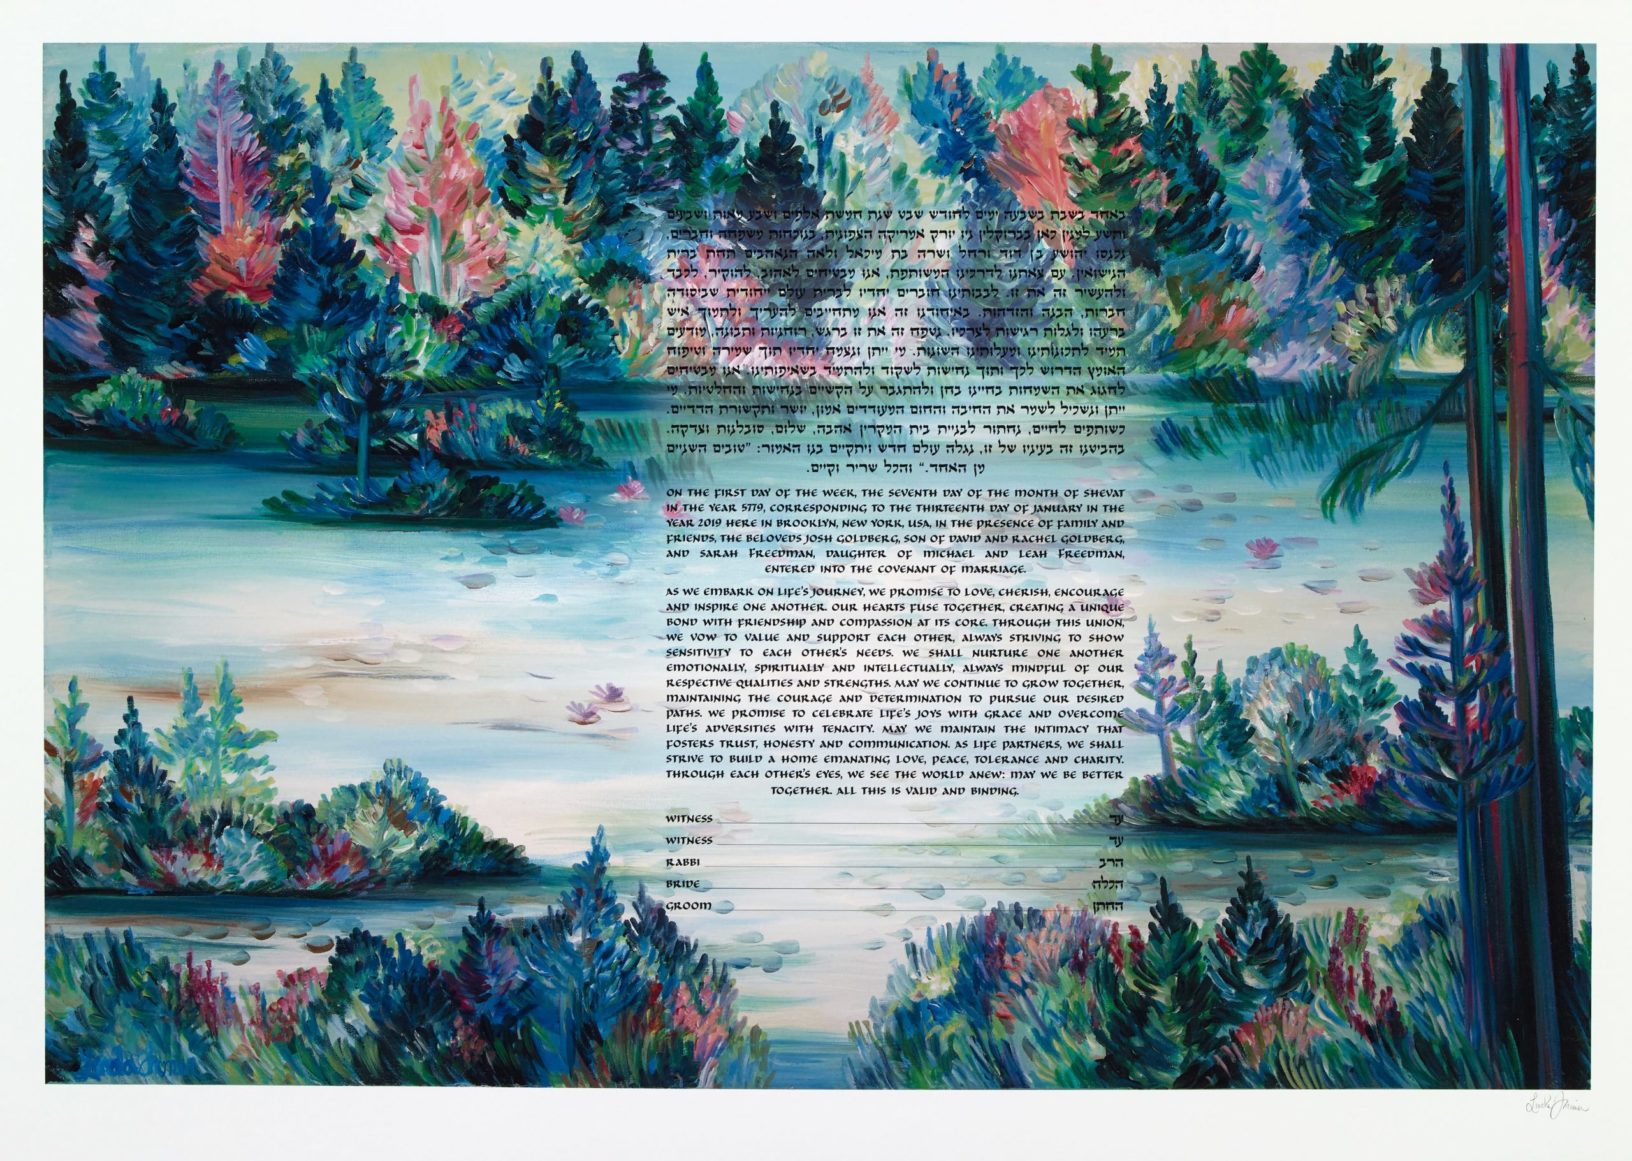 Wilderness Waterlily Garden II Ketubah Marriage Contracts by Linda Frimer